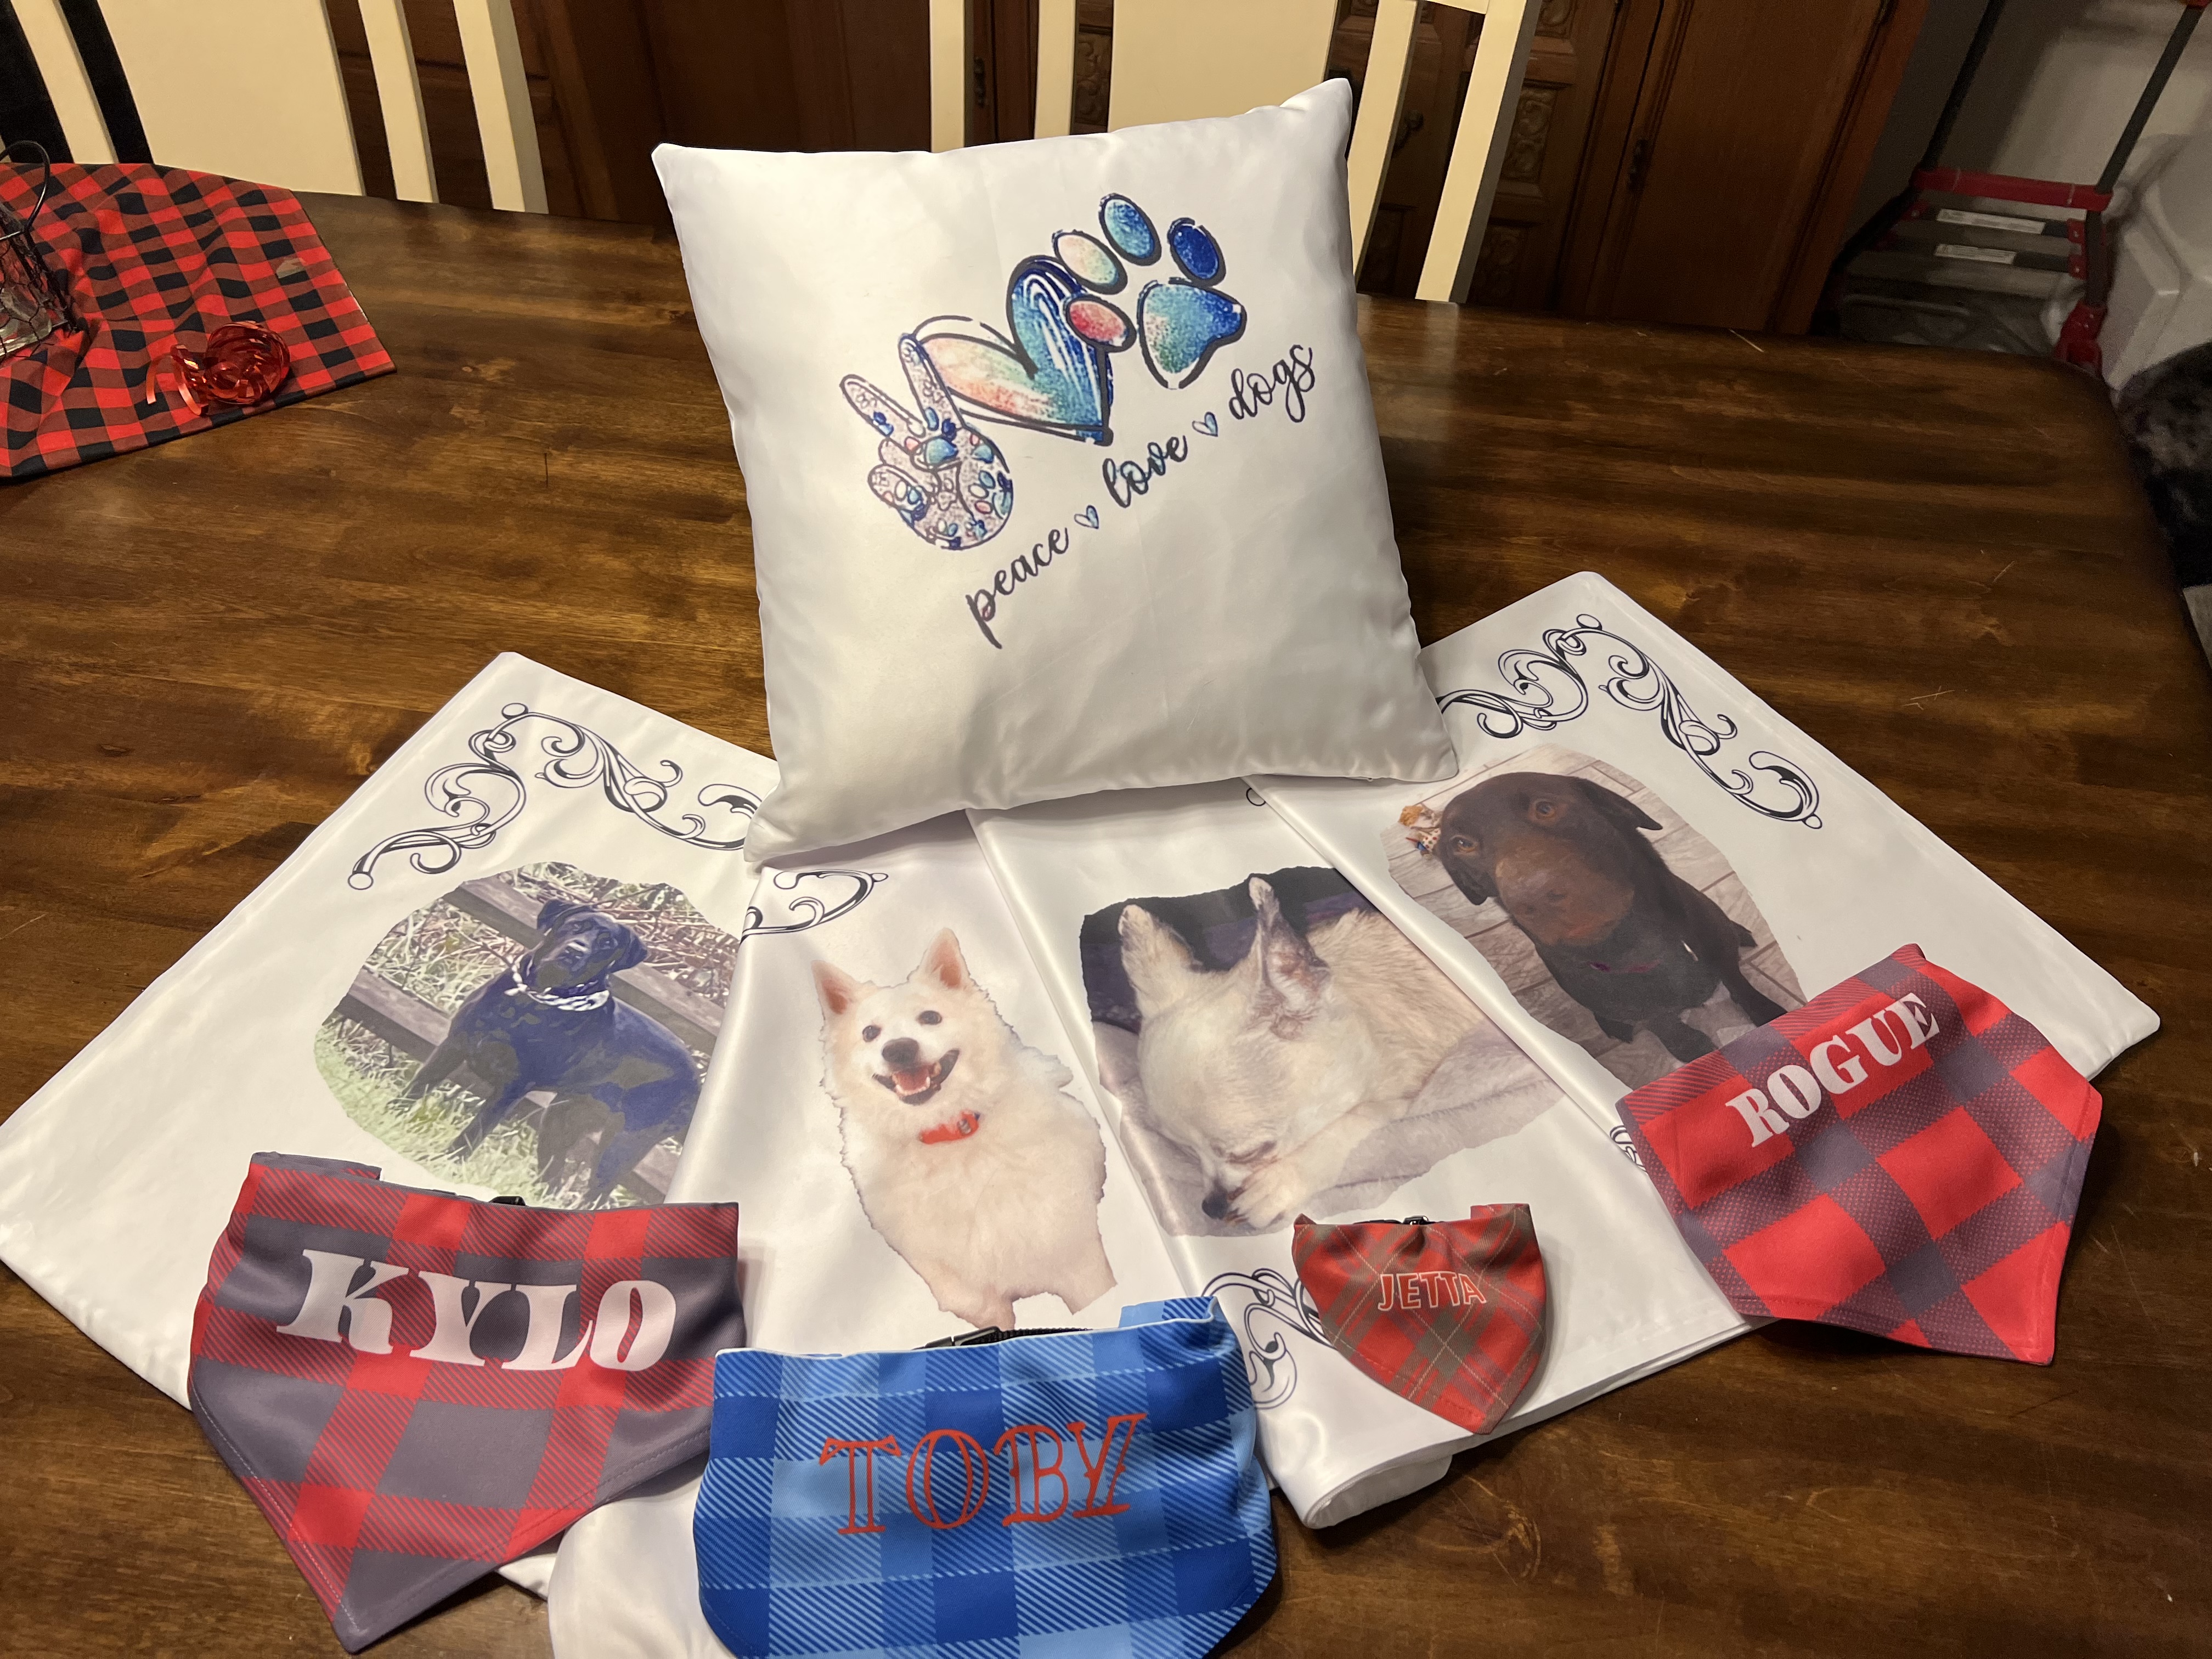 Grand babies gifts made with sublimation printing